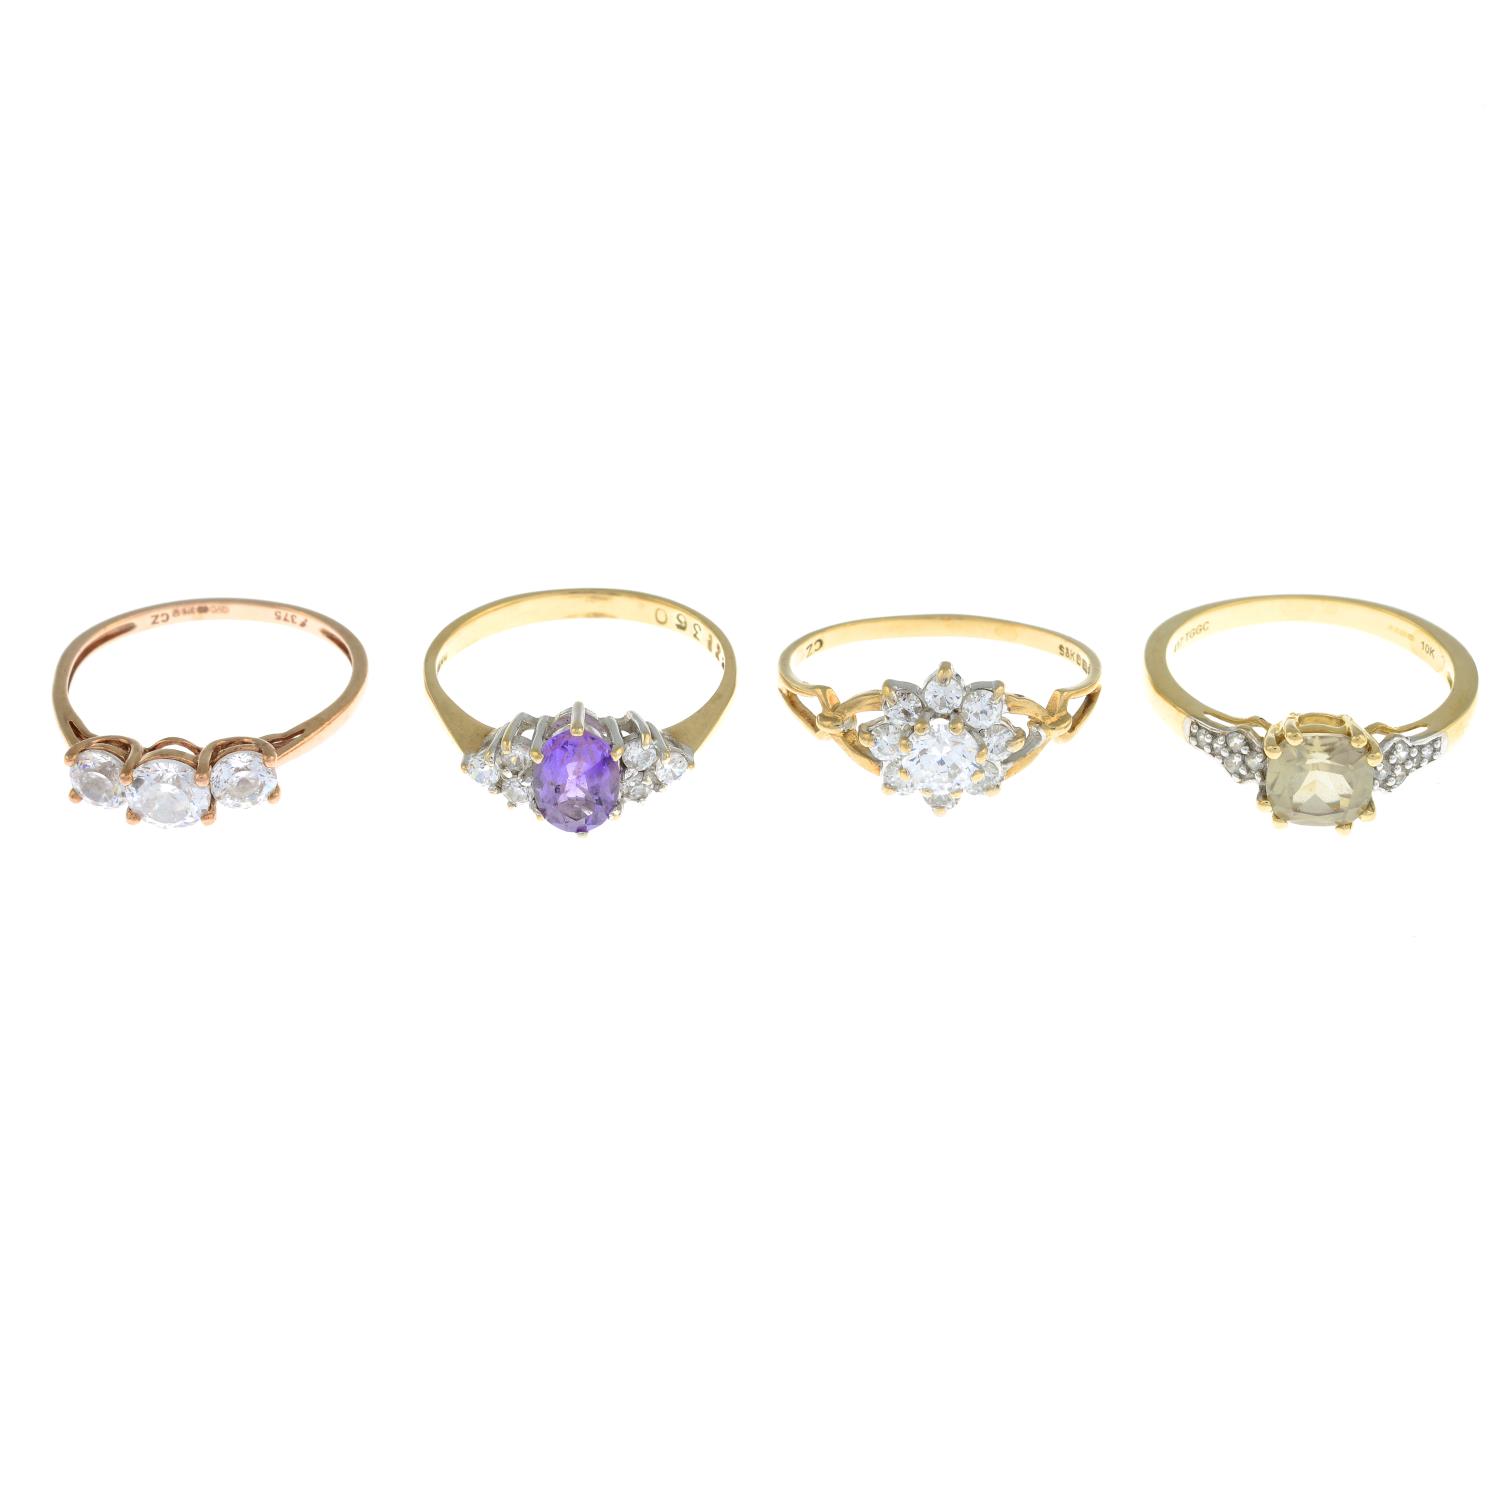 Four 9ct gold gem-set rings, to include a cubic zirconia cluster ring.